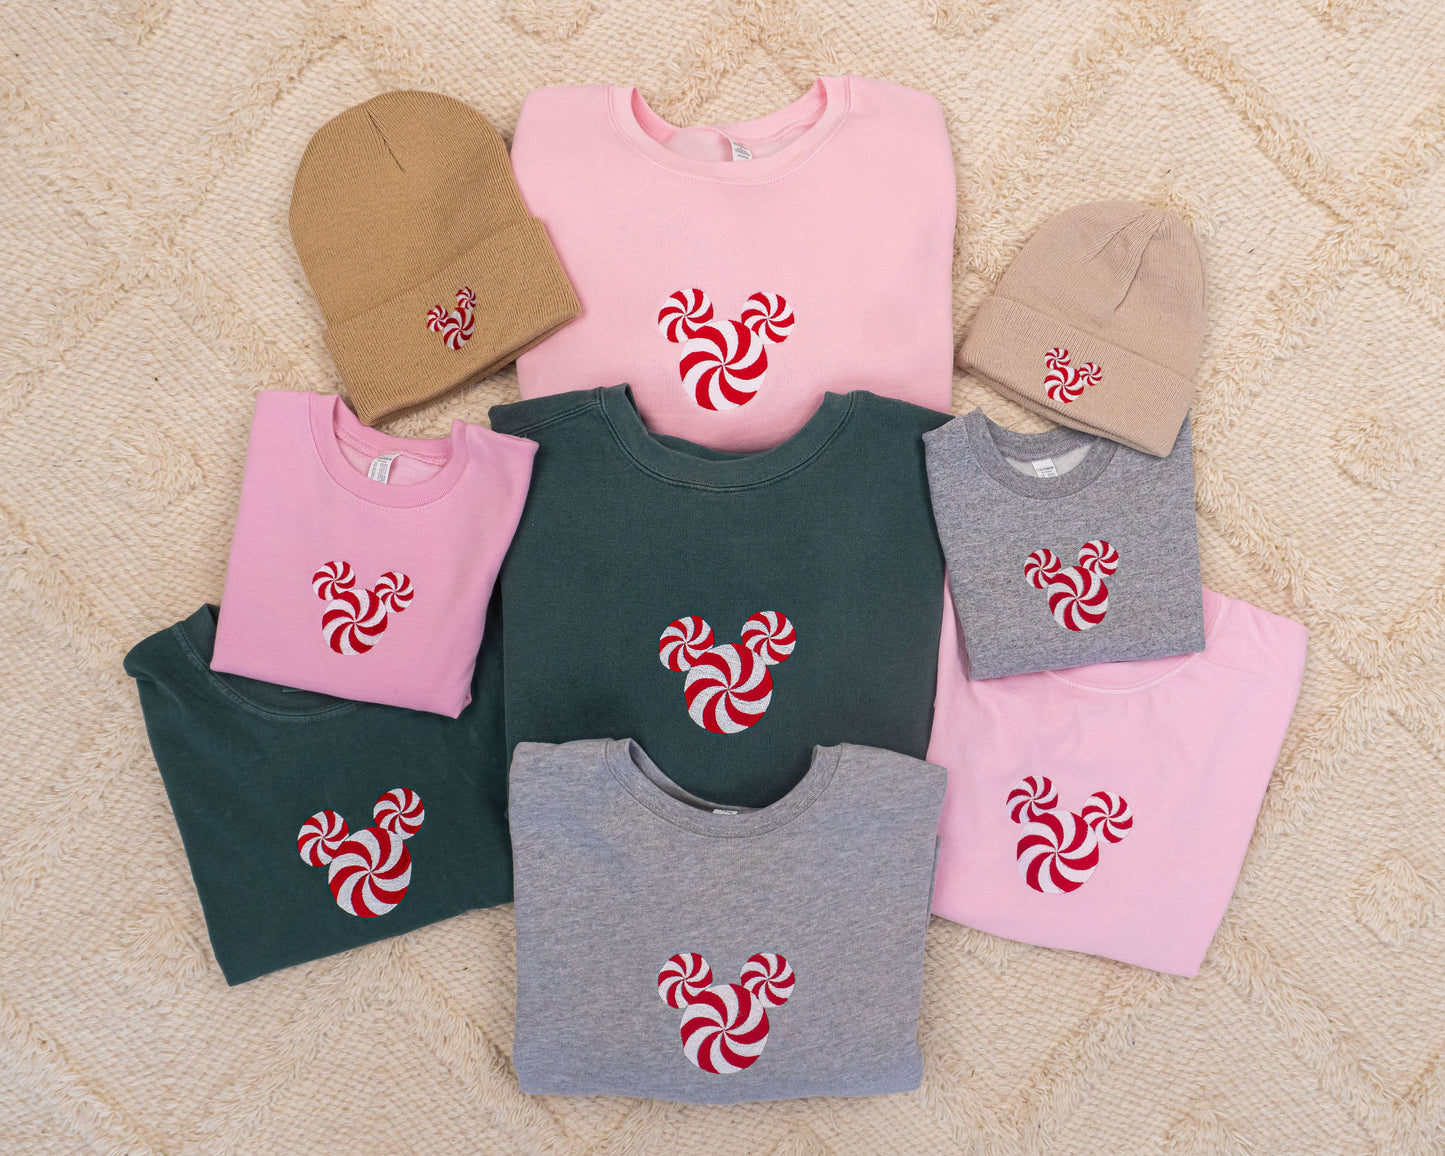 Peppermint Mouse - Embroidered Sweatshirt (Heather Gray)